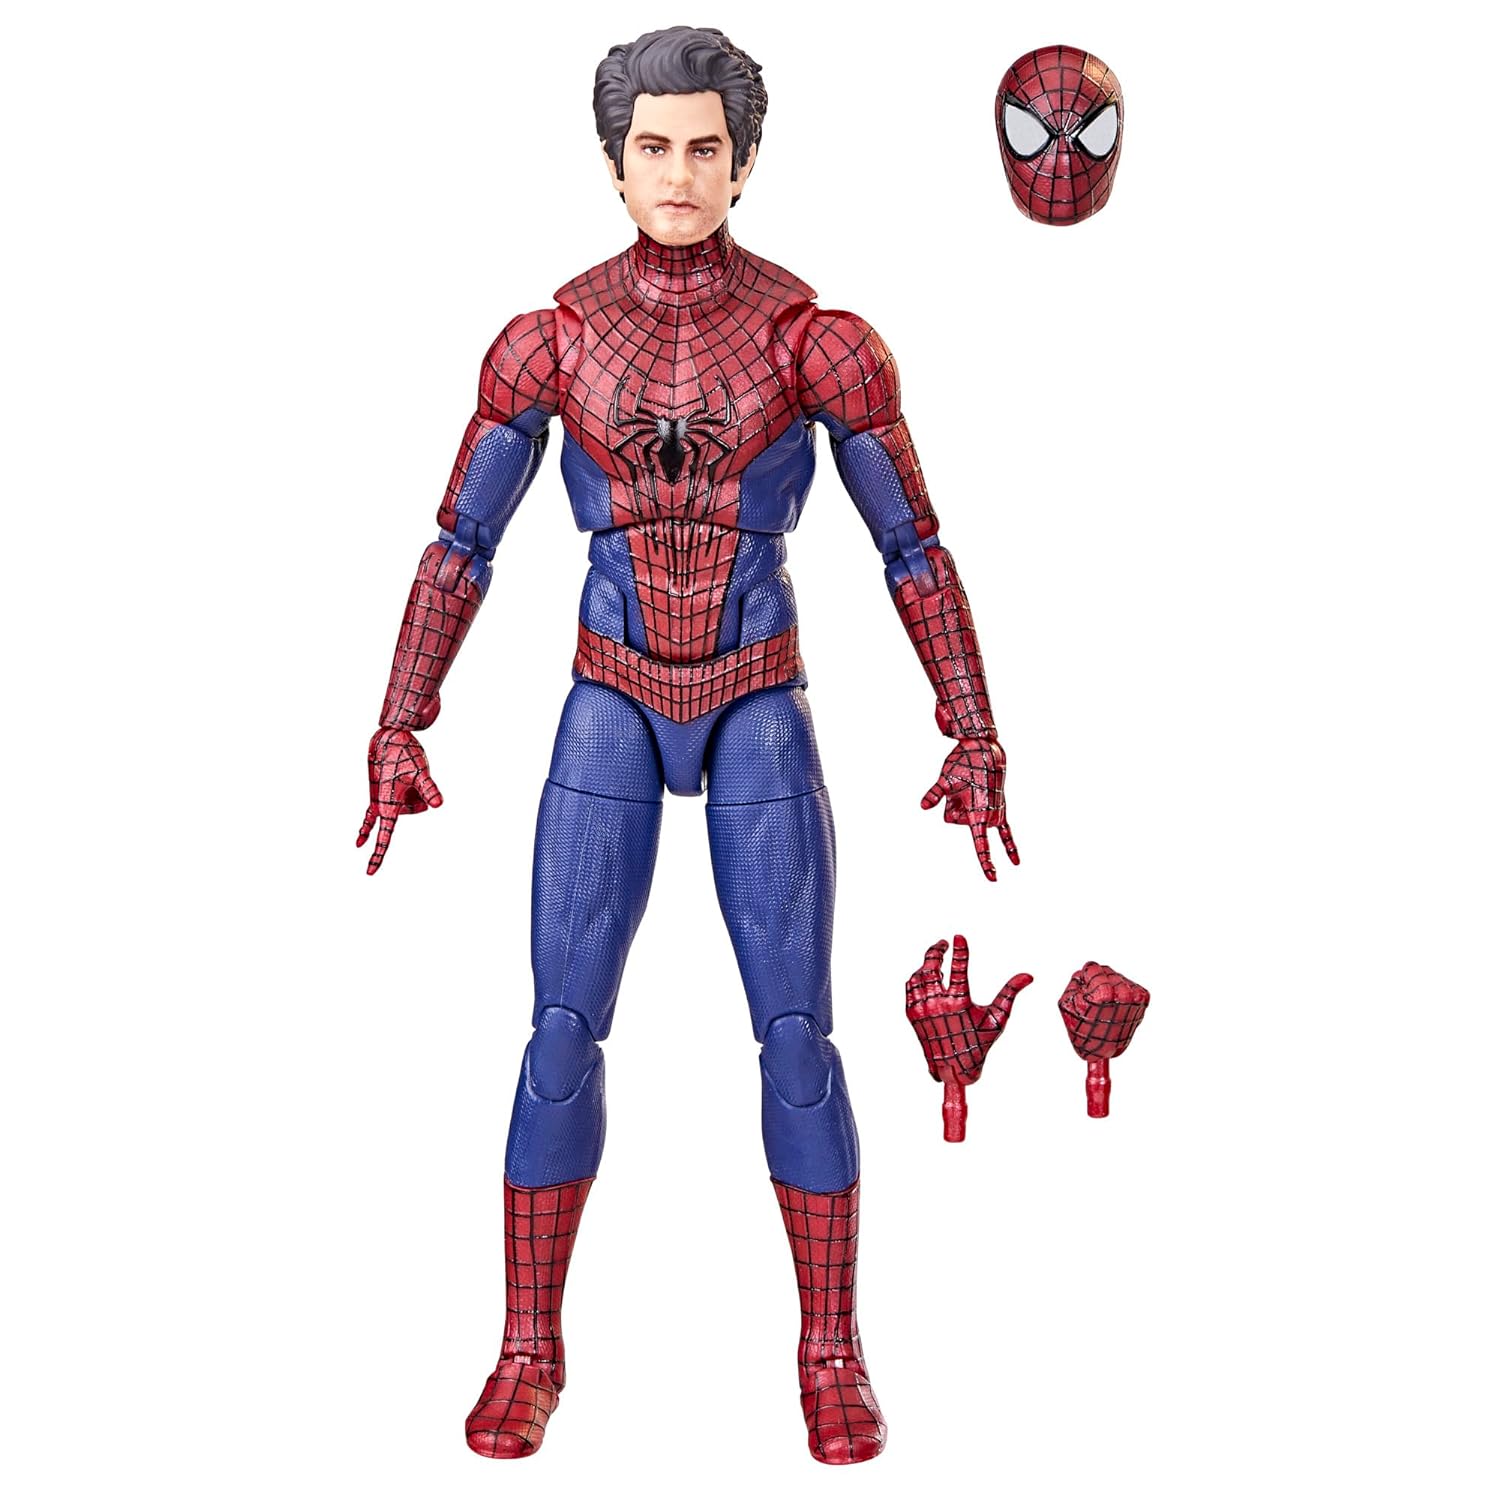 Hasbro Marvel Legends Series -. The Amazing Spider-Man 2 Collectible 6 Inch Action Figures, Ages 4 and Up